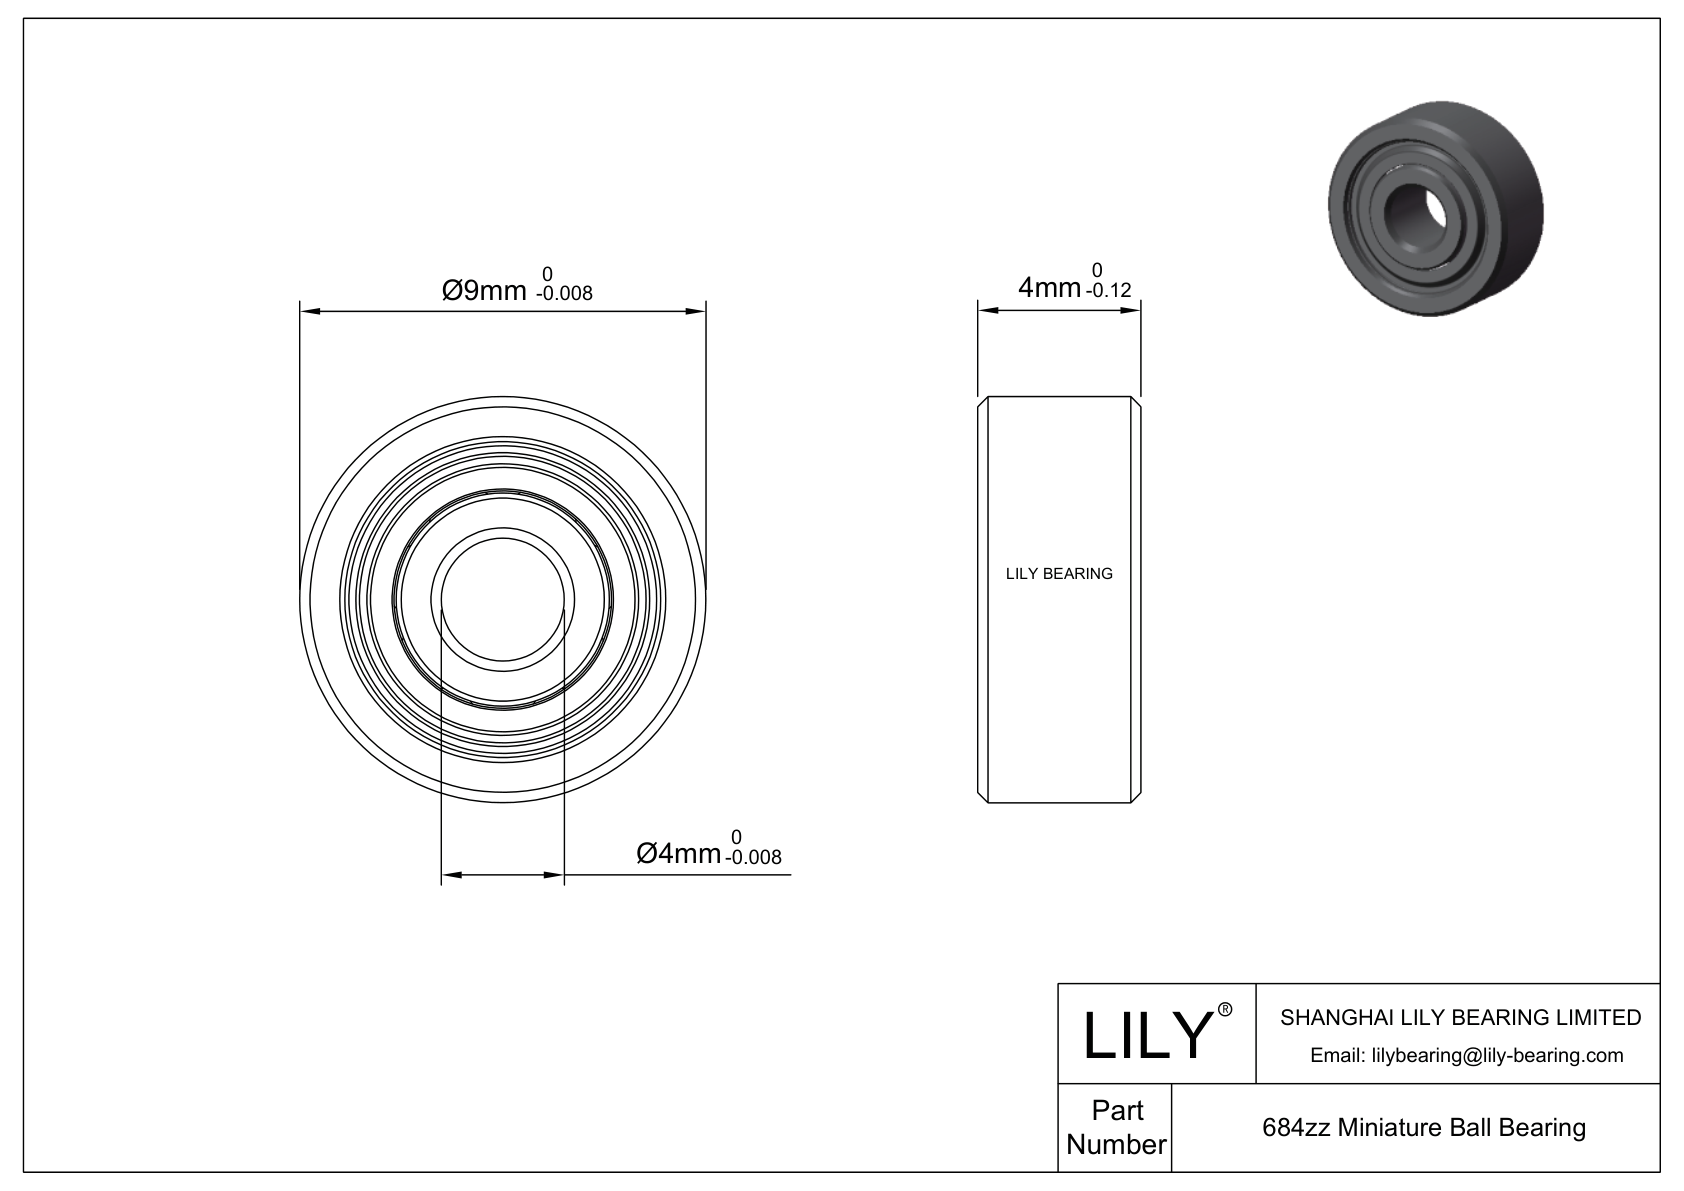 LILY-BS68413-4 POM Coated Bearing cad drawing